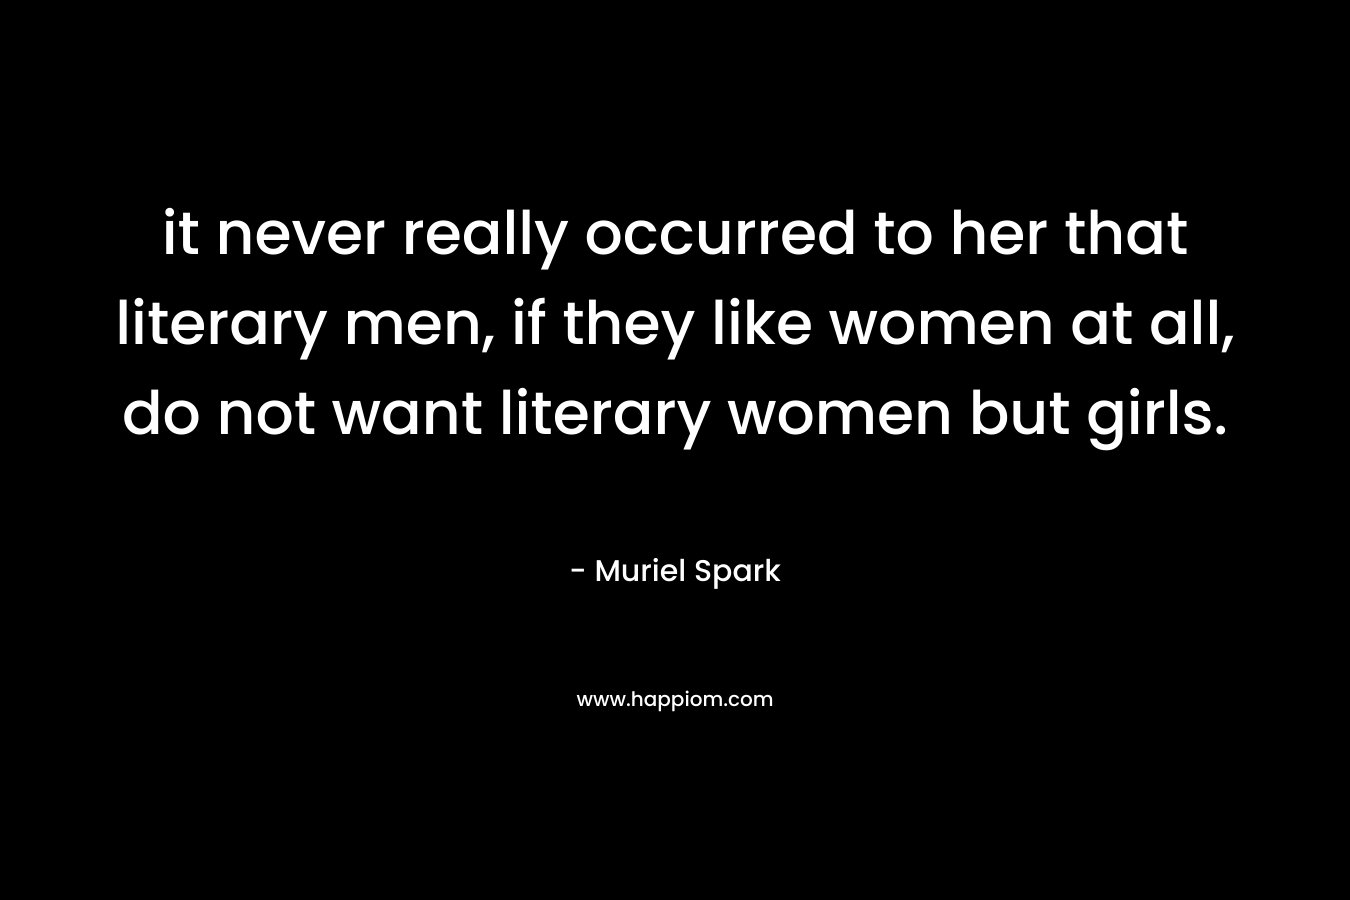 it never really occurred to her that literary men, if they like women at all, do not want literary women but girls. – Muriel Spark